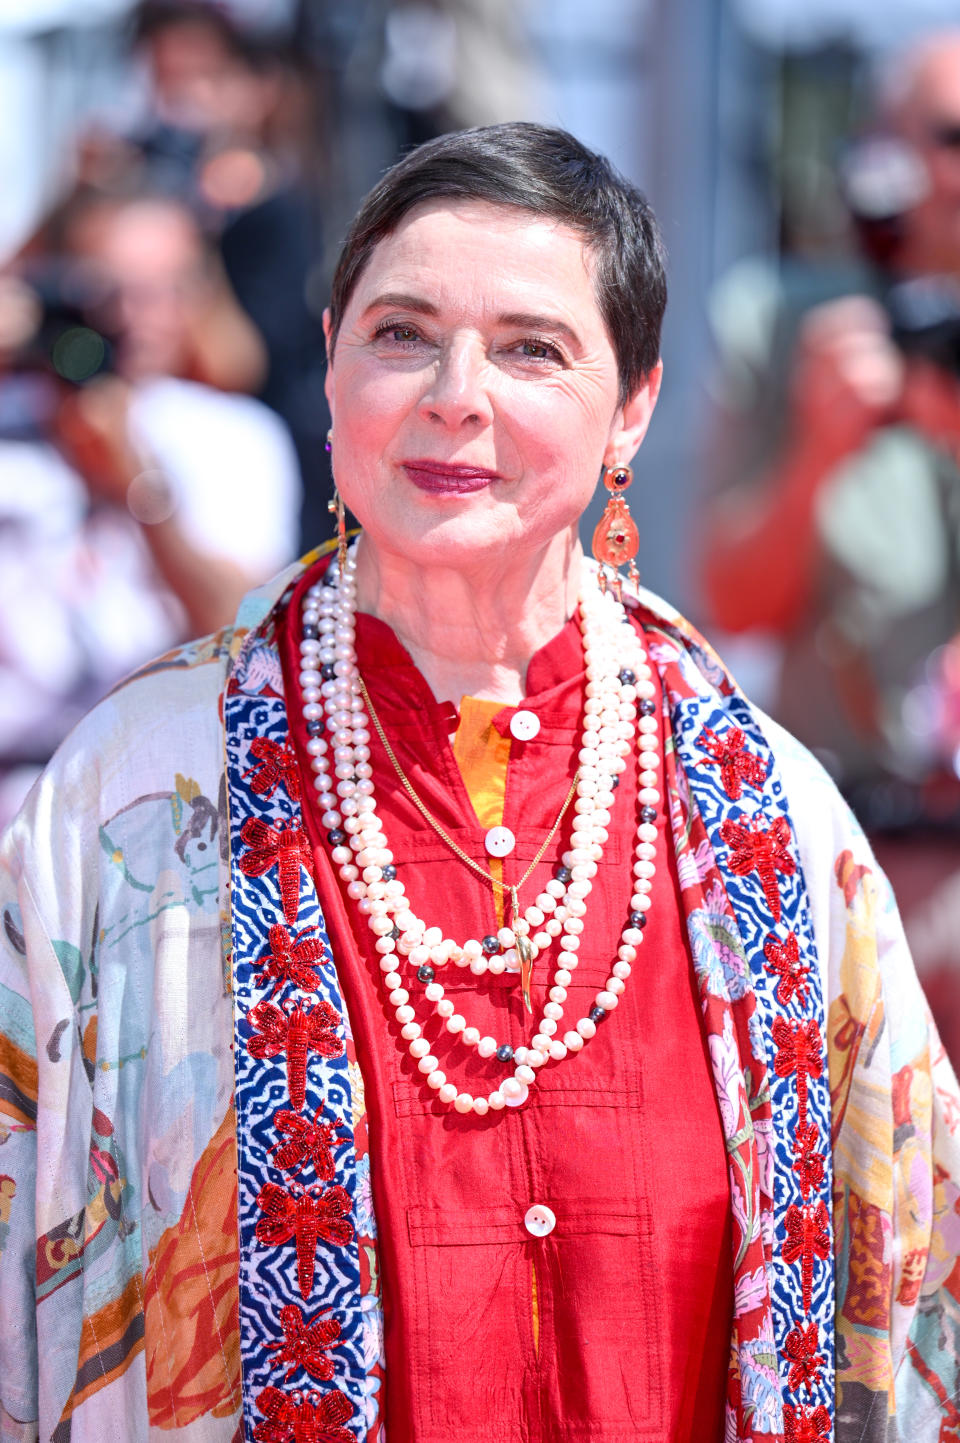 CANNES, FRANCE - MAY 26: Isabella Rossellini attends the 